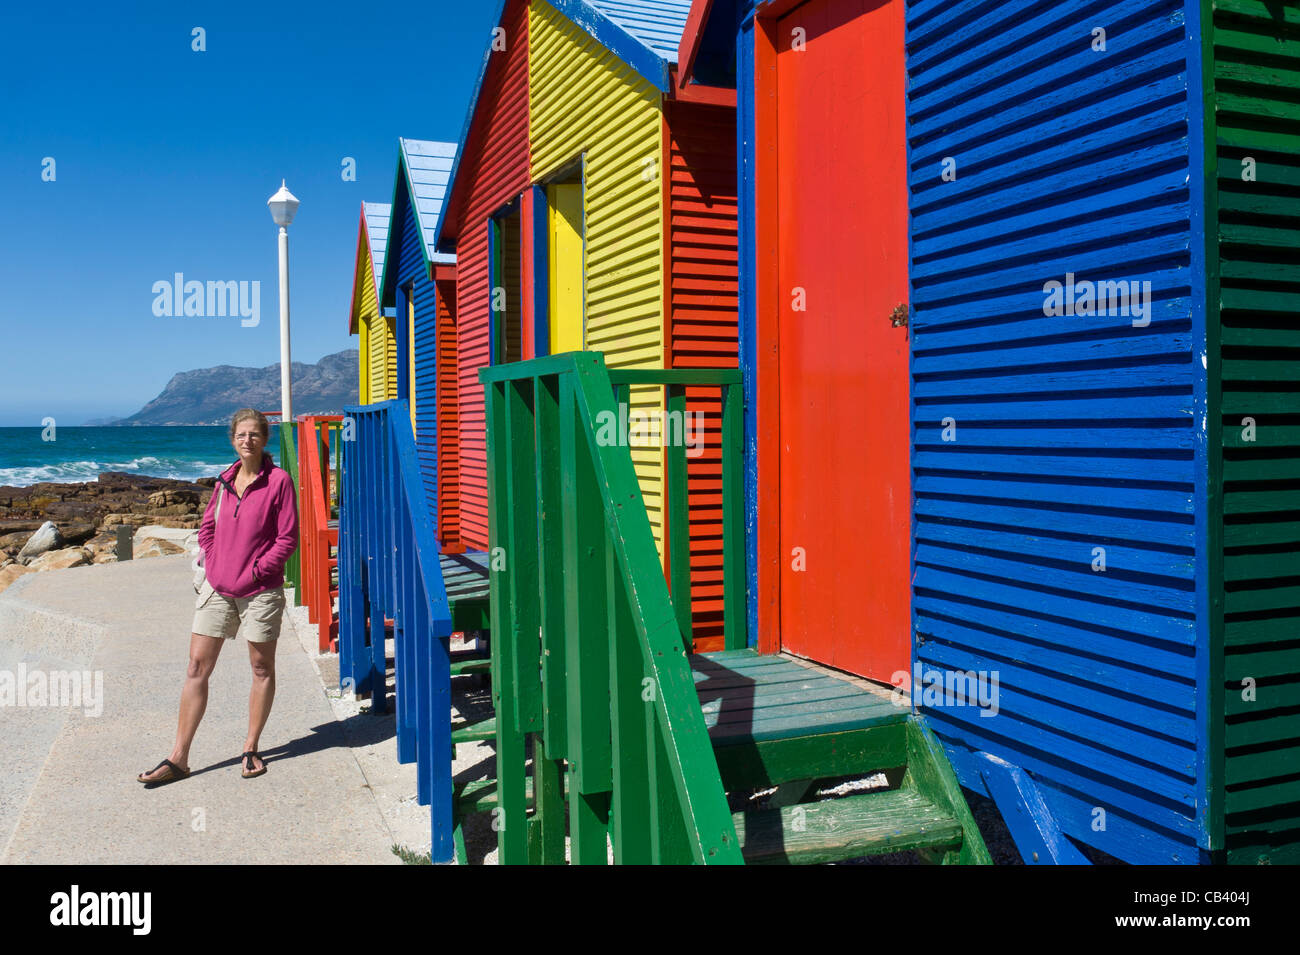 Colorful beach huts at St. James Bay near Simons Town Western Cape South Africa Stock Photo